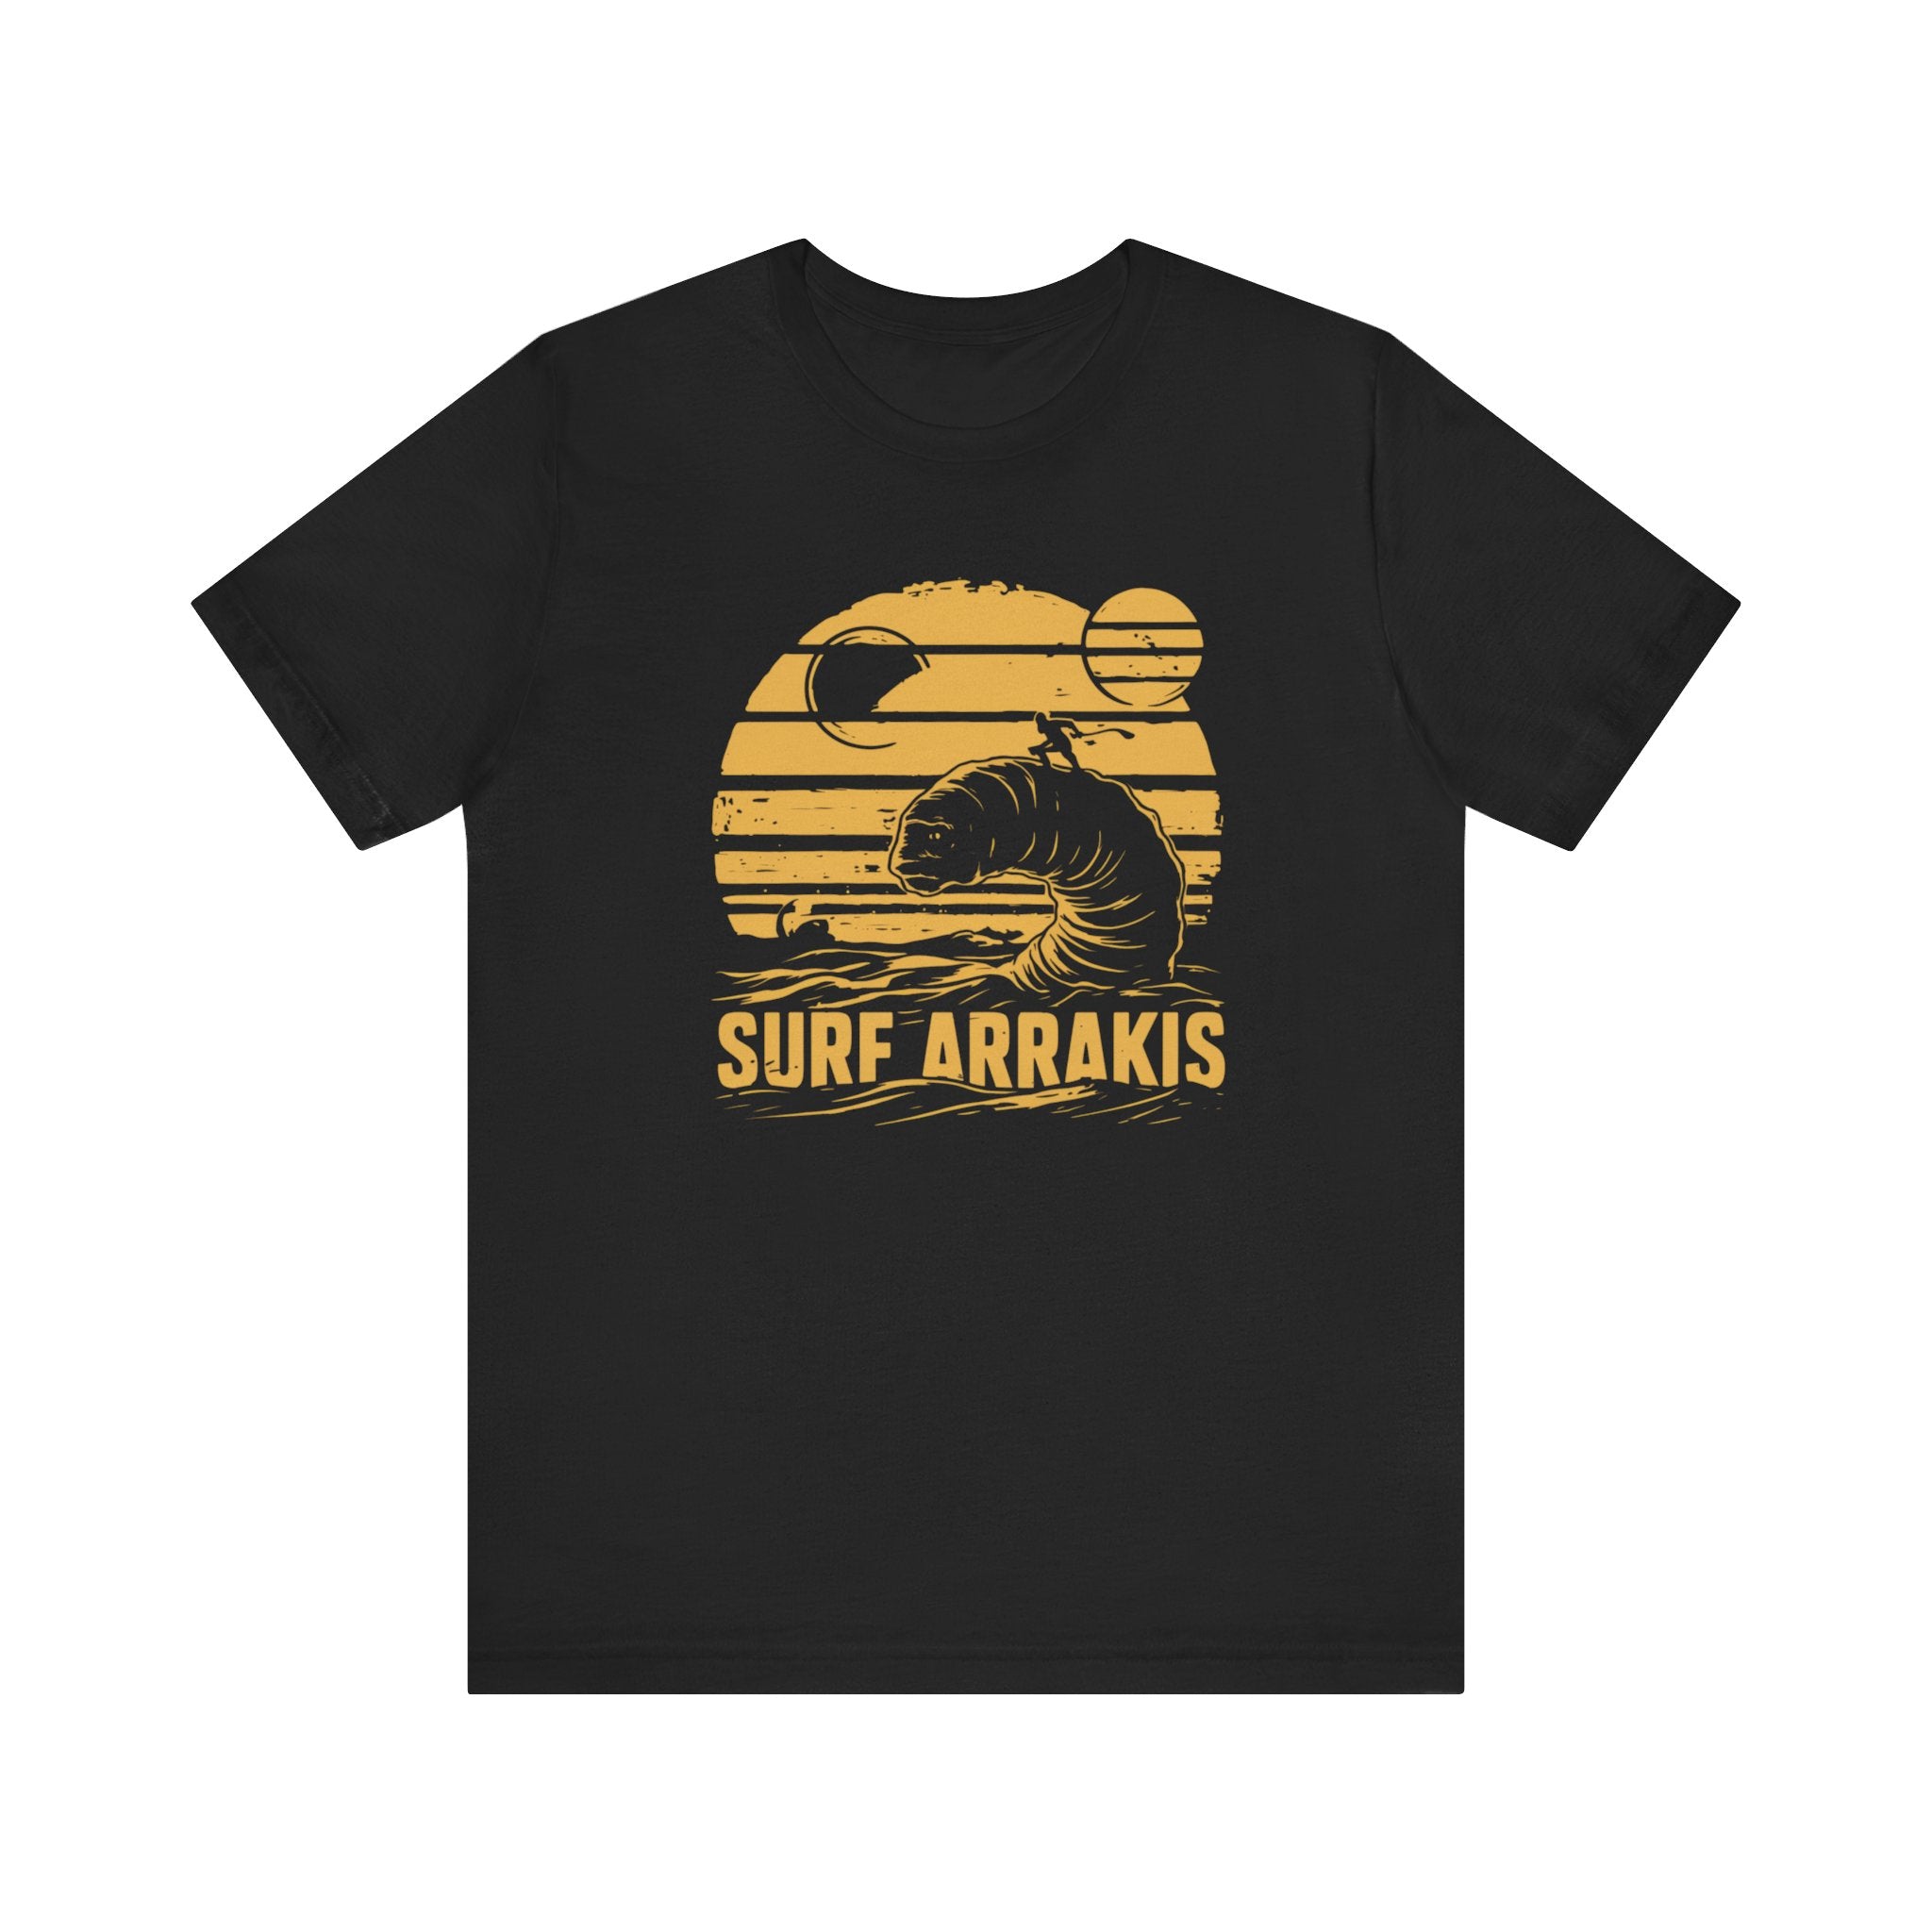 A comfortable black **Surf Arrakis - T-Shirt** with a striking yellow design showcasing two moons, a wave, and the bold text “SURF ARRAKIS.”